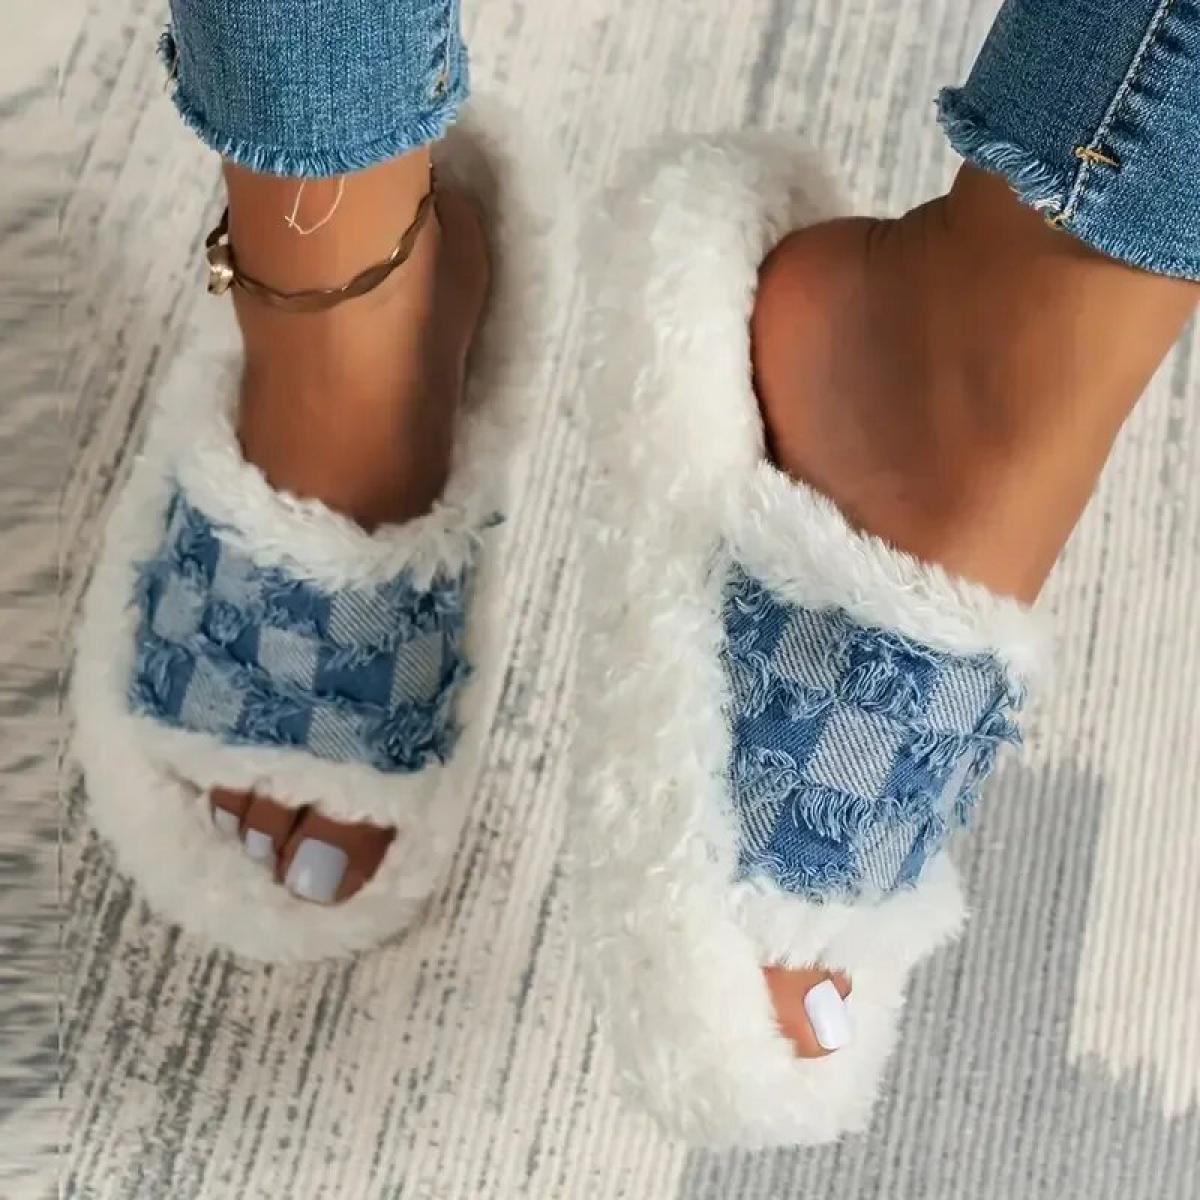 Winter Women's New Thick Sole Denim Slippers Fashion  And  Style Large Luxury Designer Plush Cotton Slippers 43